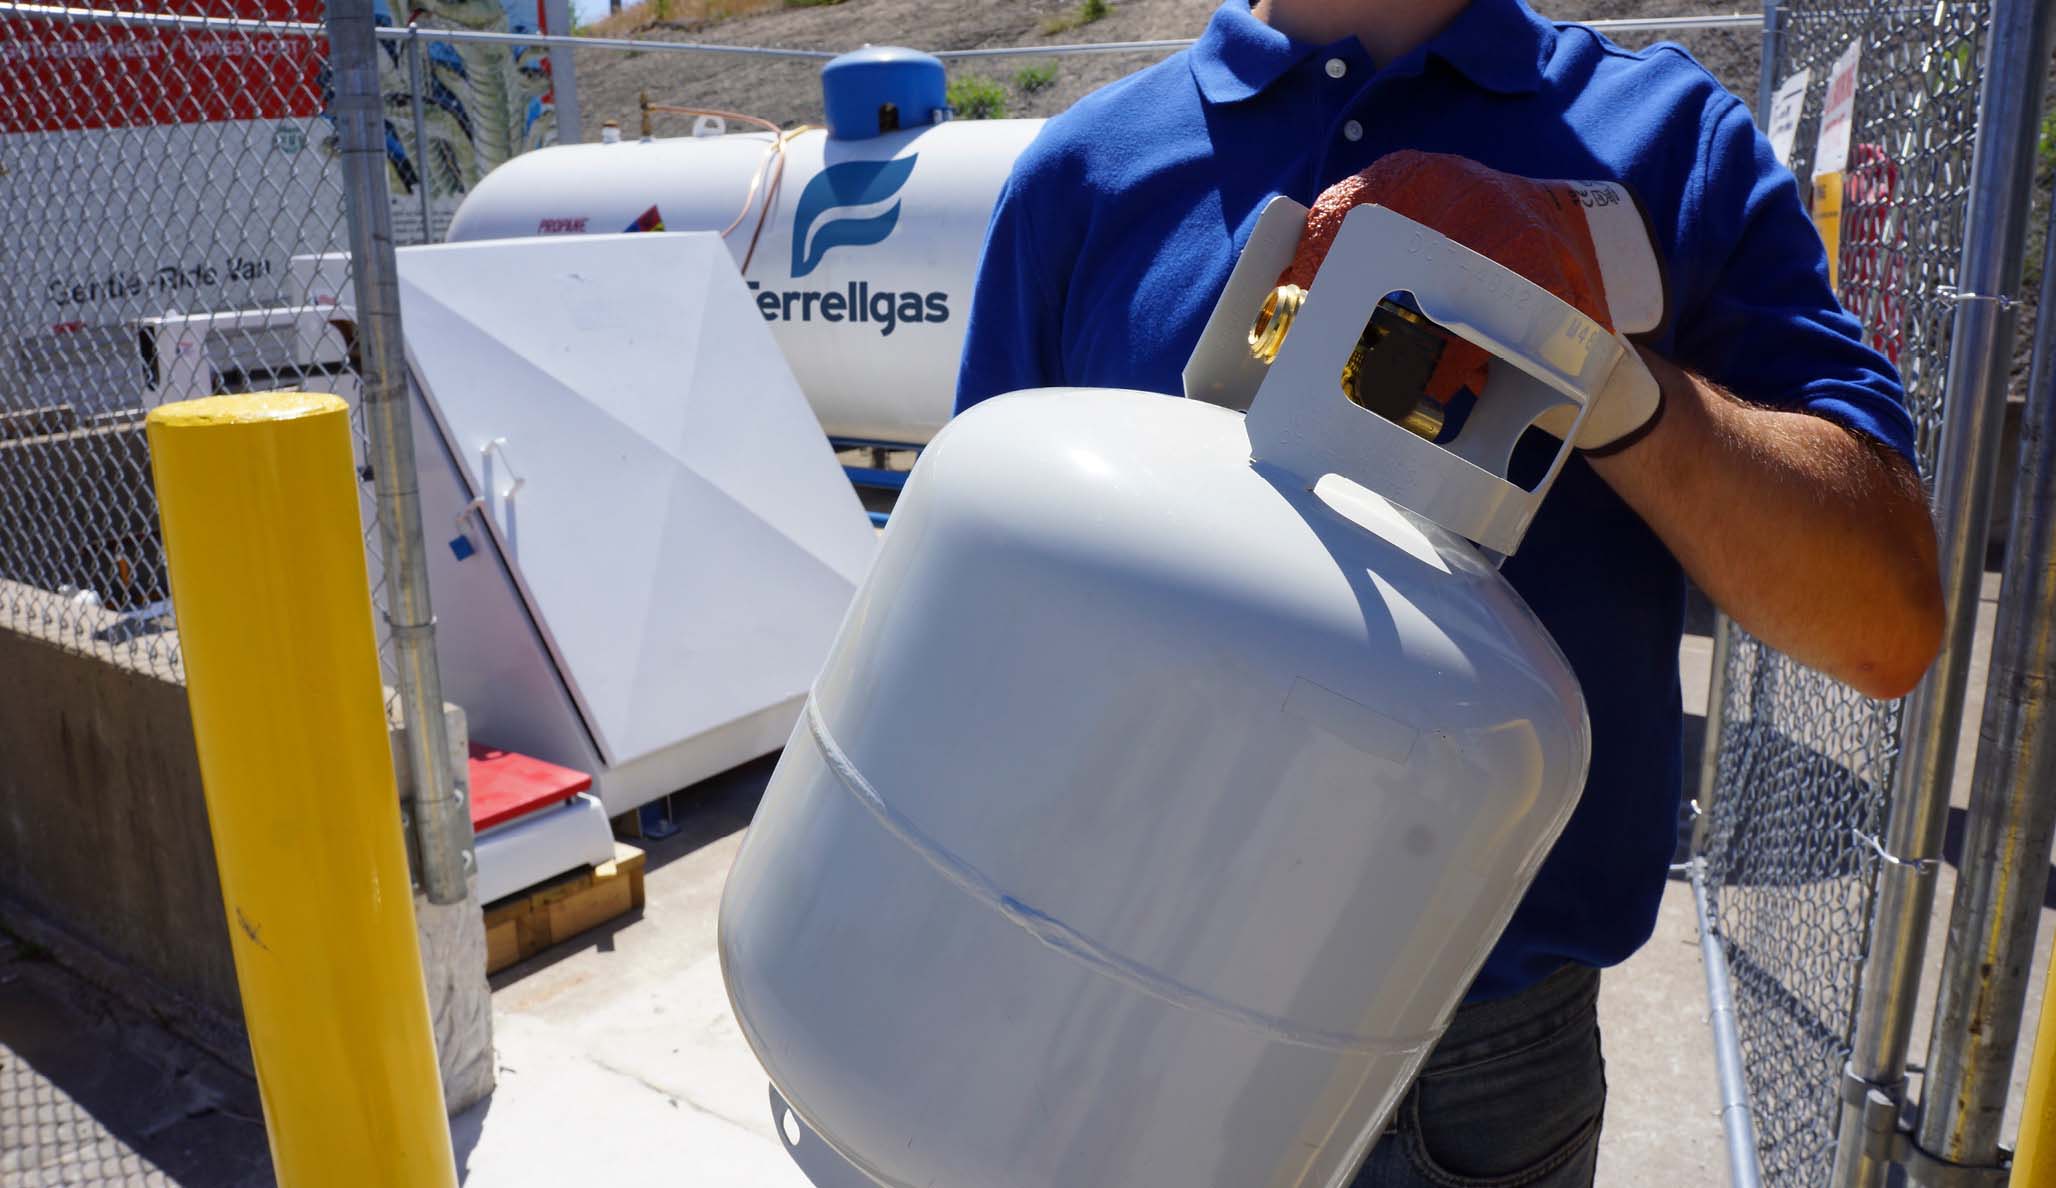 How to properly dispose of small propane tanks, Ferrellgas